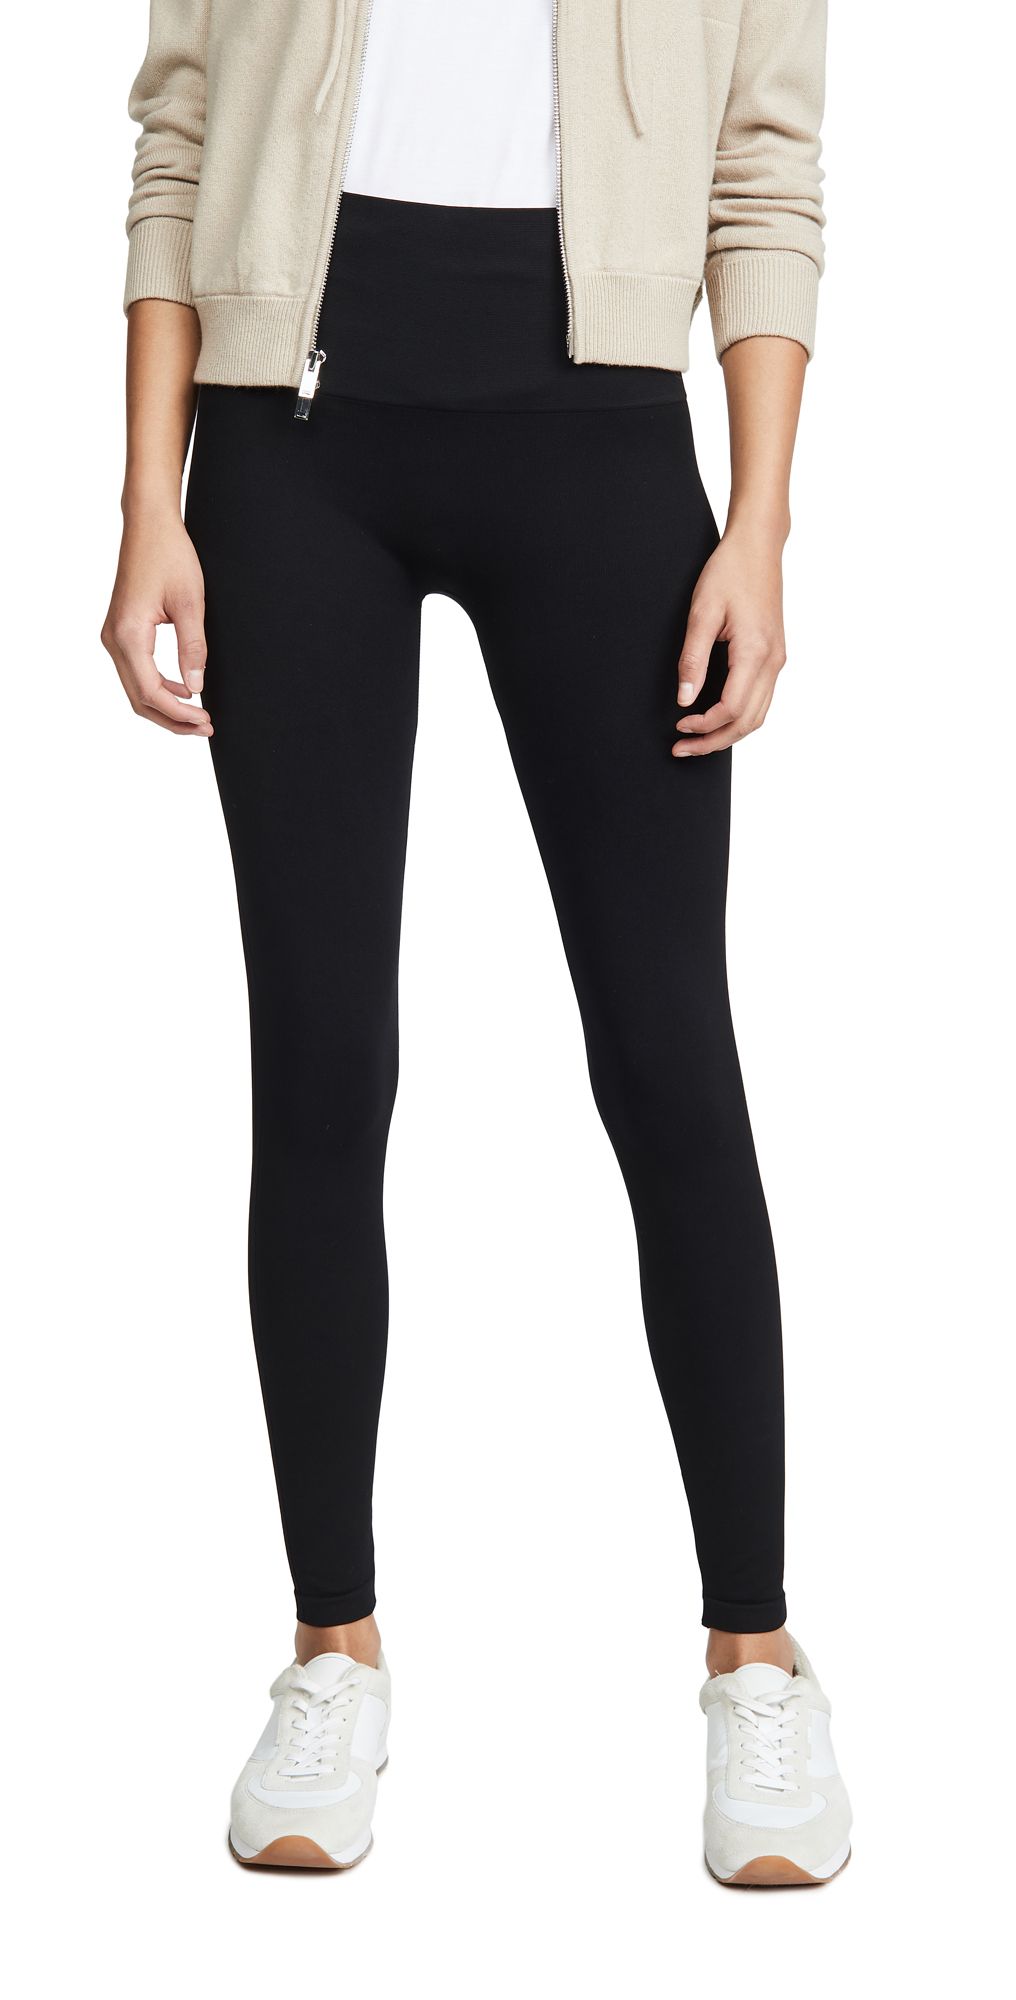 BLANQI Hipster Post Partum Support Leggings | Shopbop